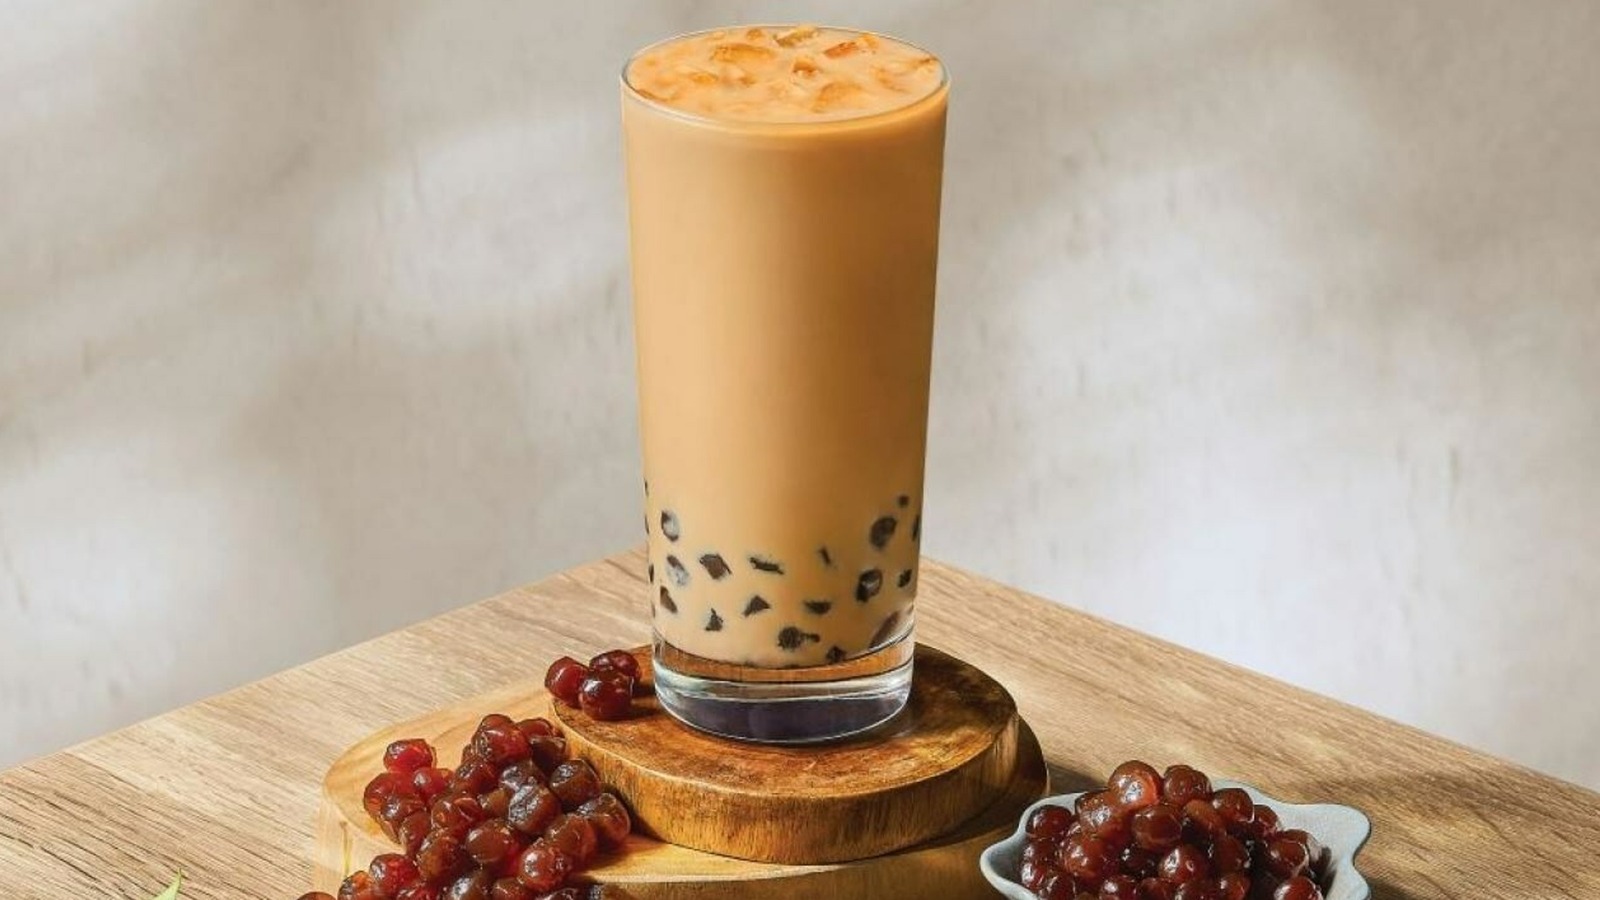 The Coffee Bean & Tea Leaf Debuts Boba Beverages And World Of Tea Program